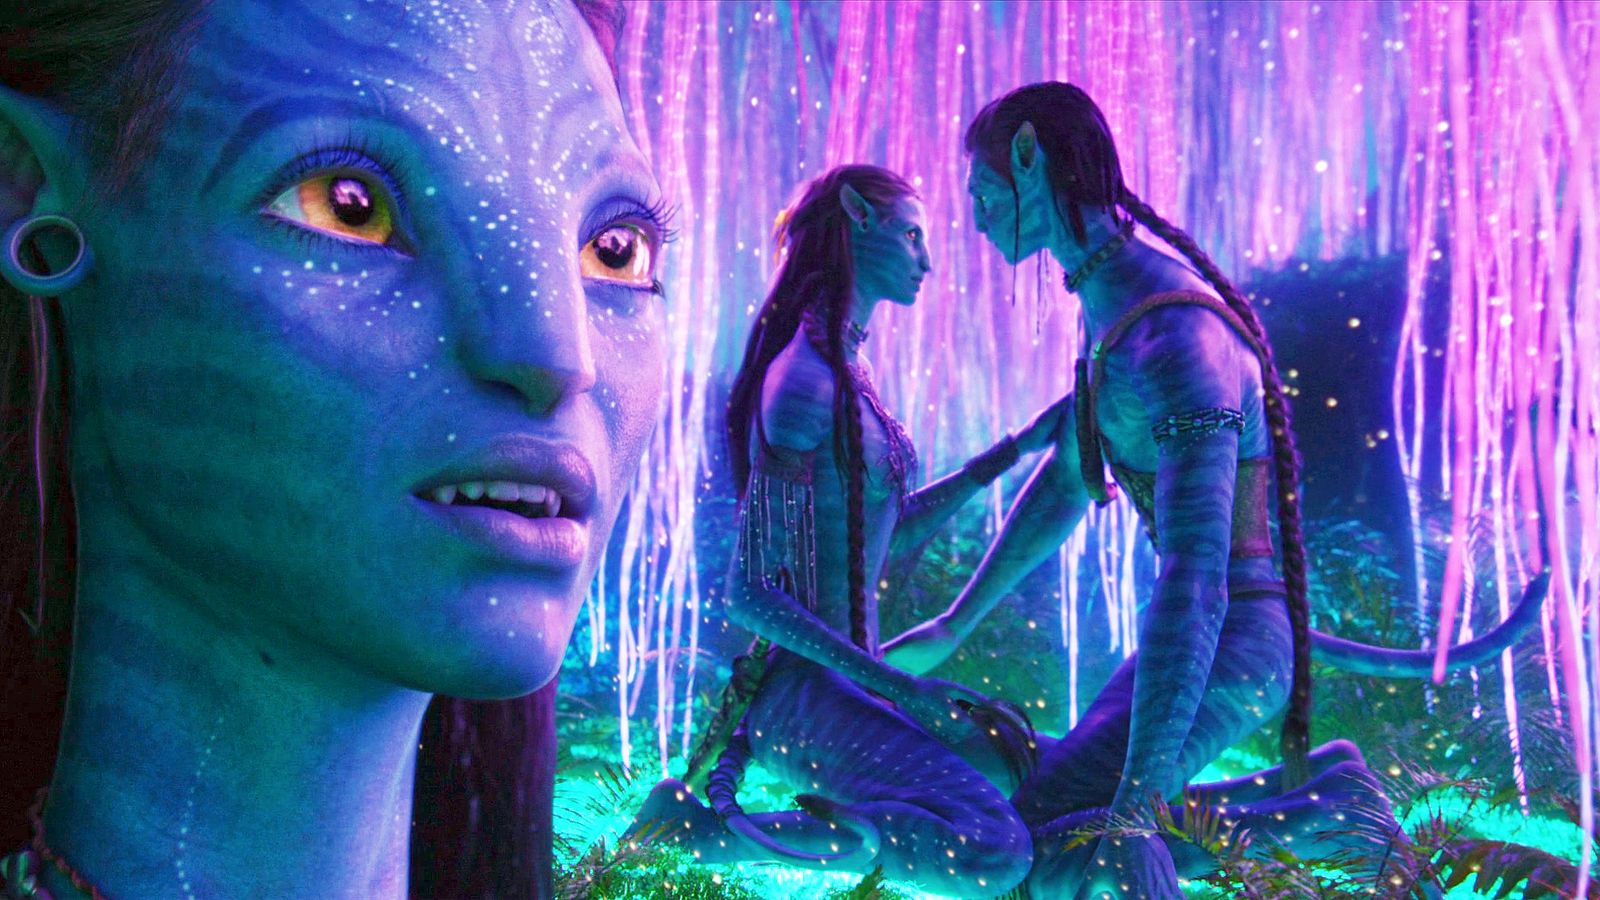 HD desktop wallpaper: Nature, Avatar, Glow, Tail, Yellow Eyes, Necklace,  Braid, Movie, Jake Sully, Na'vi, Neytiri (Avatar), Long Hair, Brown Hair  download free picture #206681